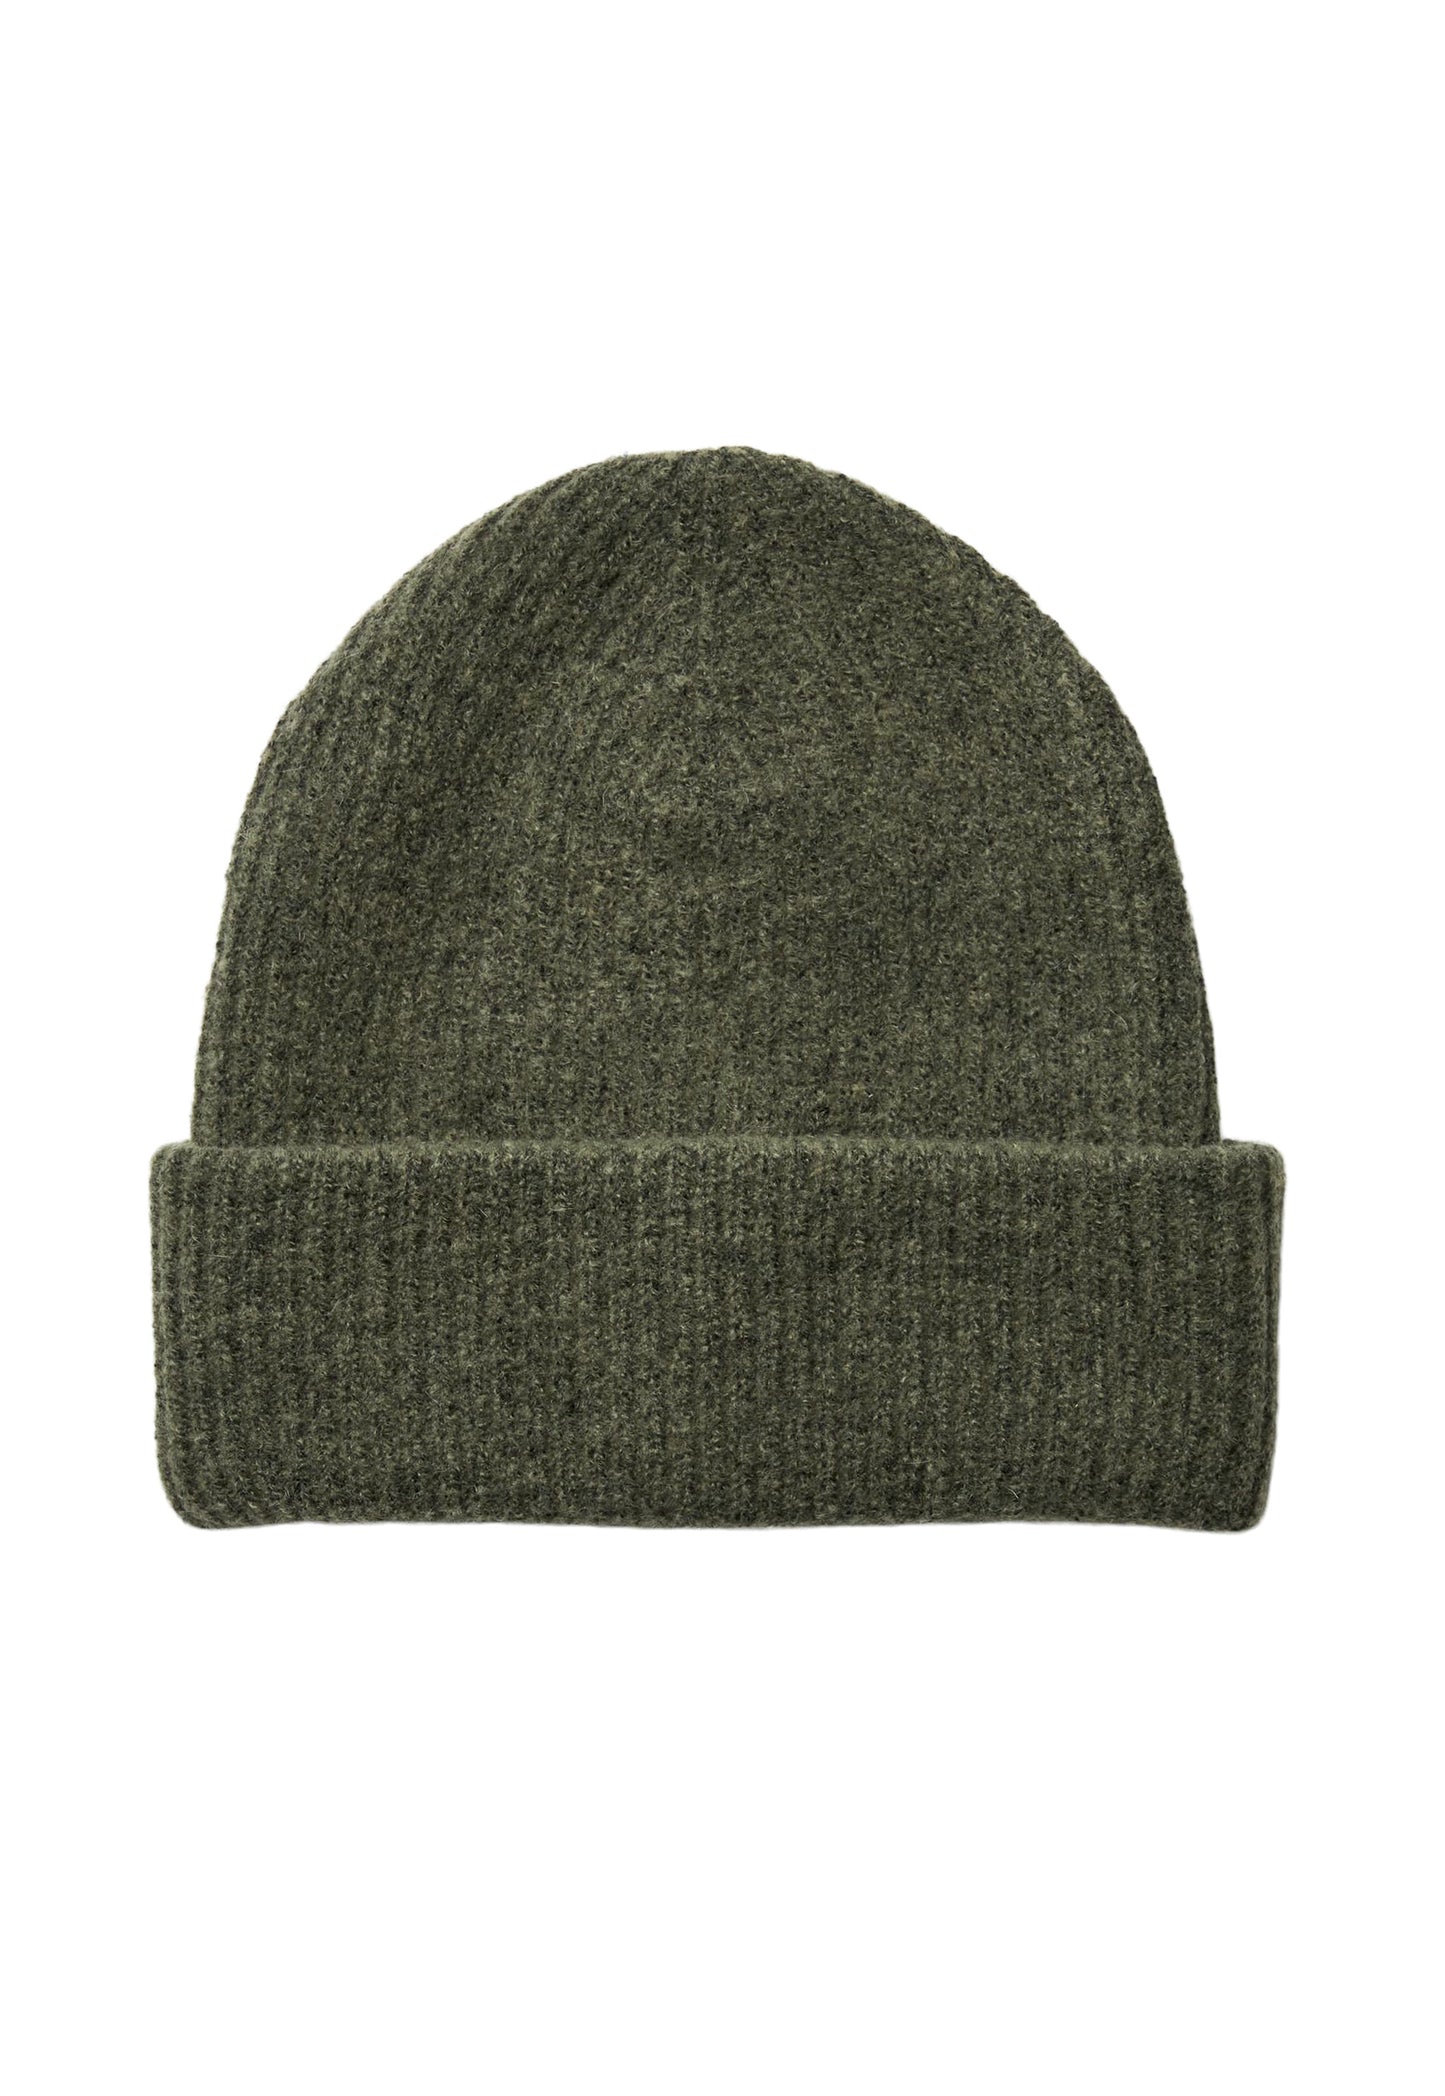 PIECES Cashmere Fluffy Knit Ribbed Turn Up Beanie Hat in Khaki Green - One Nation Clothing